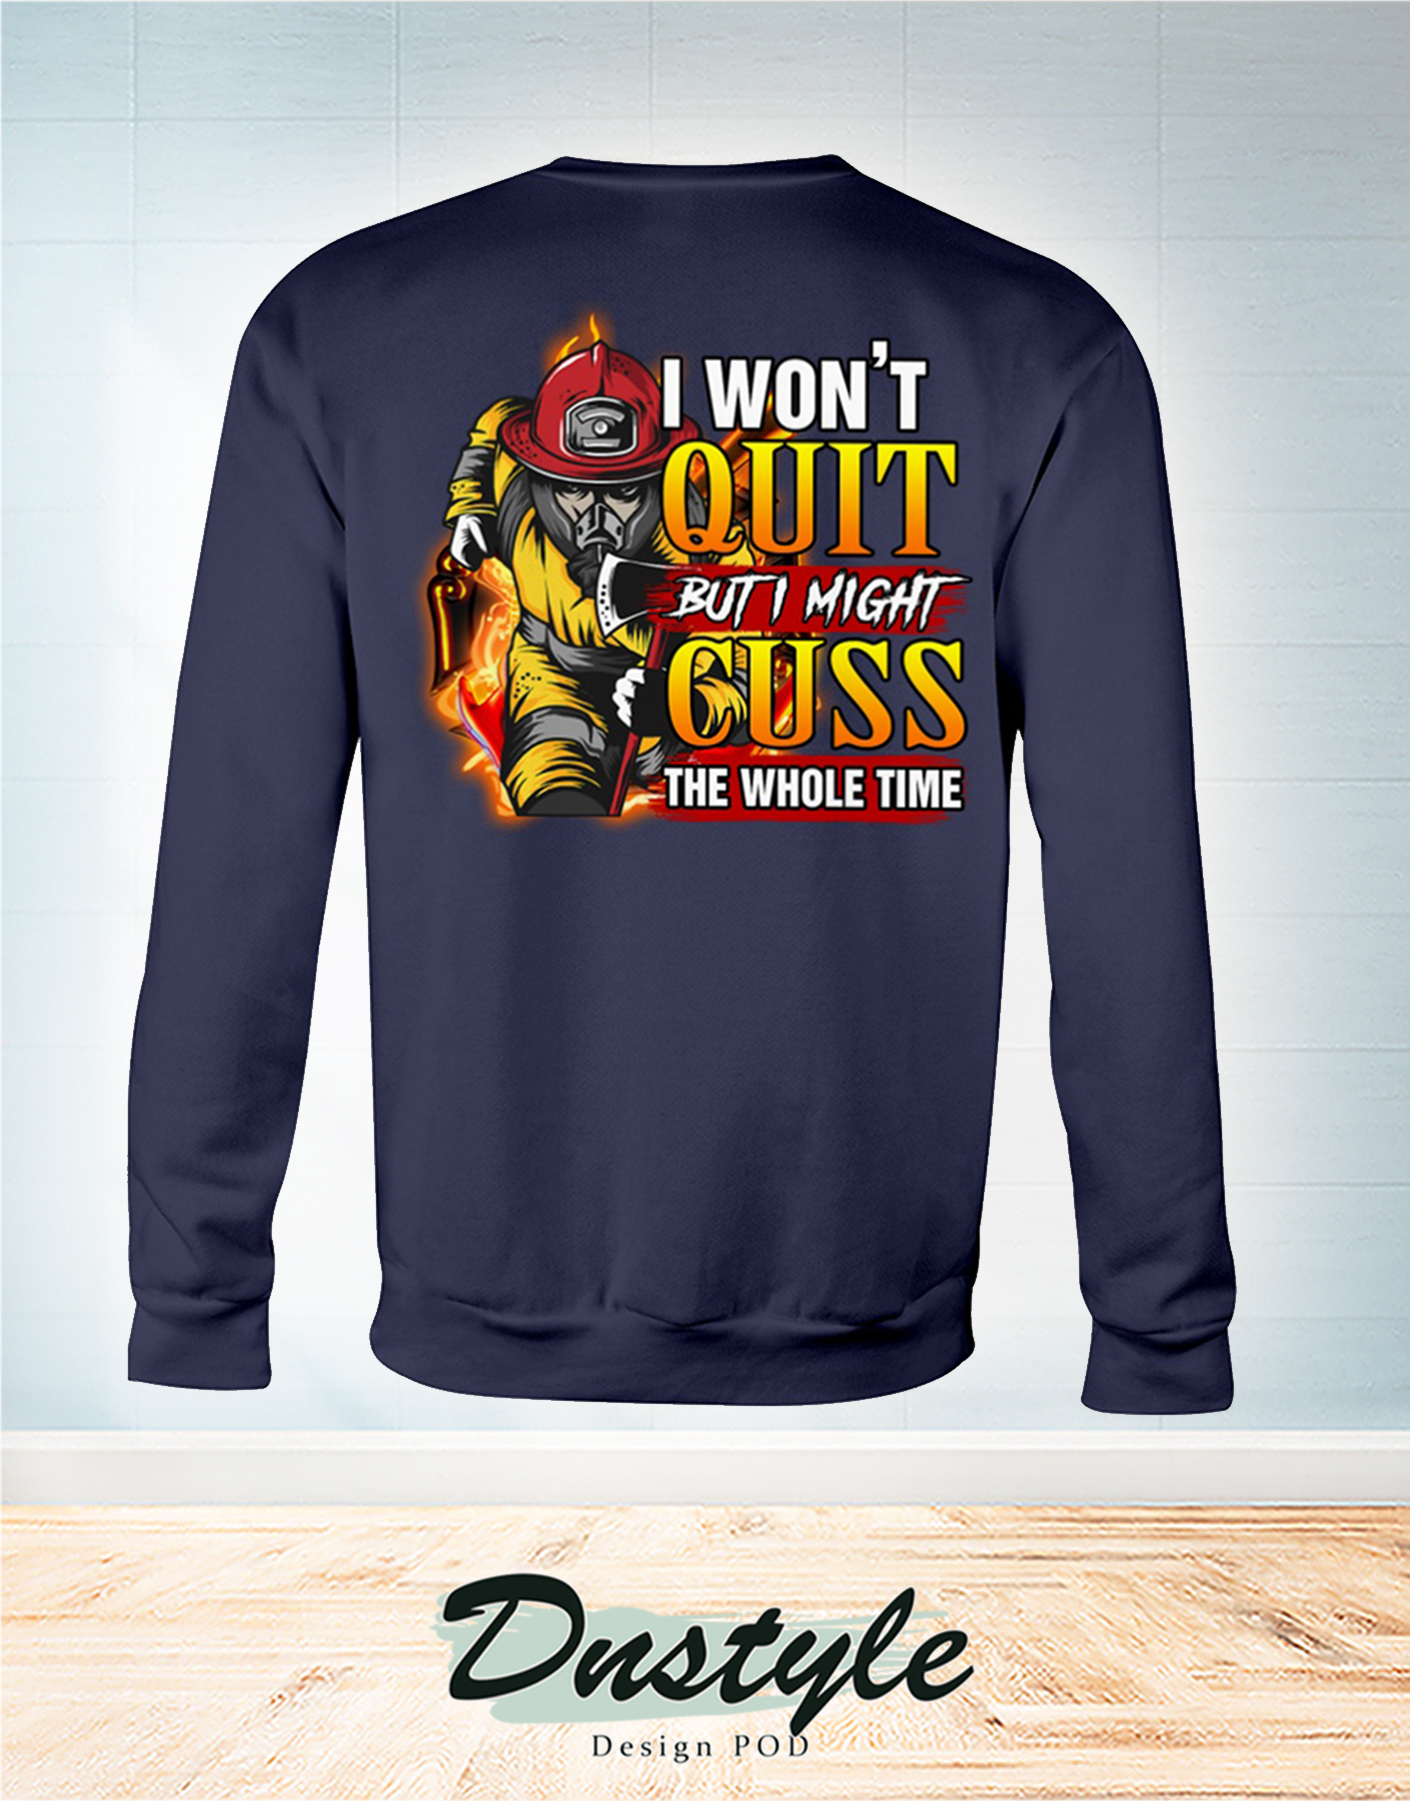 Firefighter I won't quit but I might cuss the whole time long sleeve